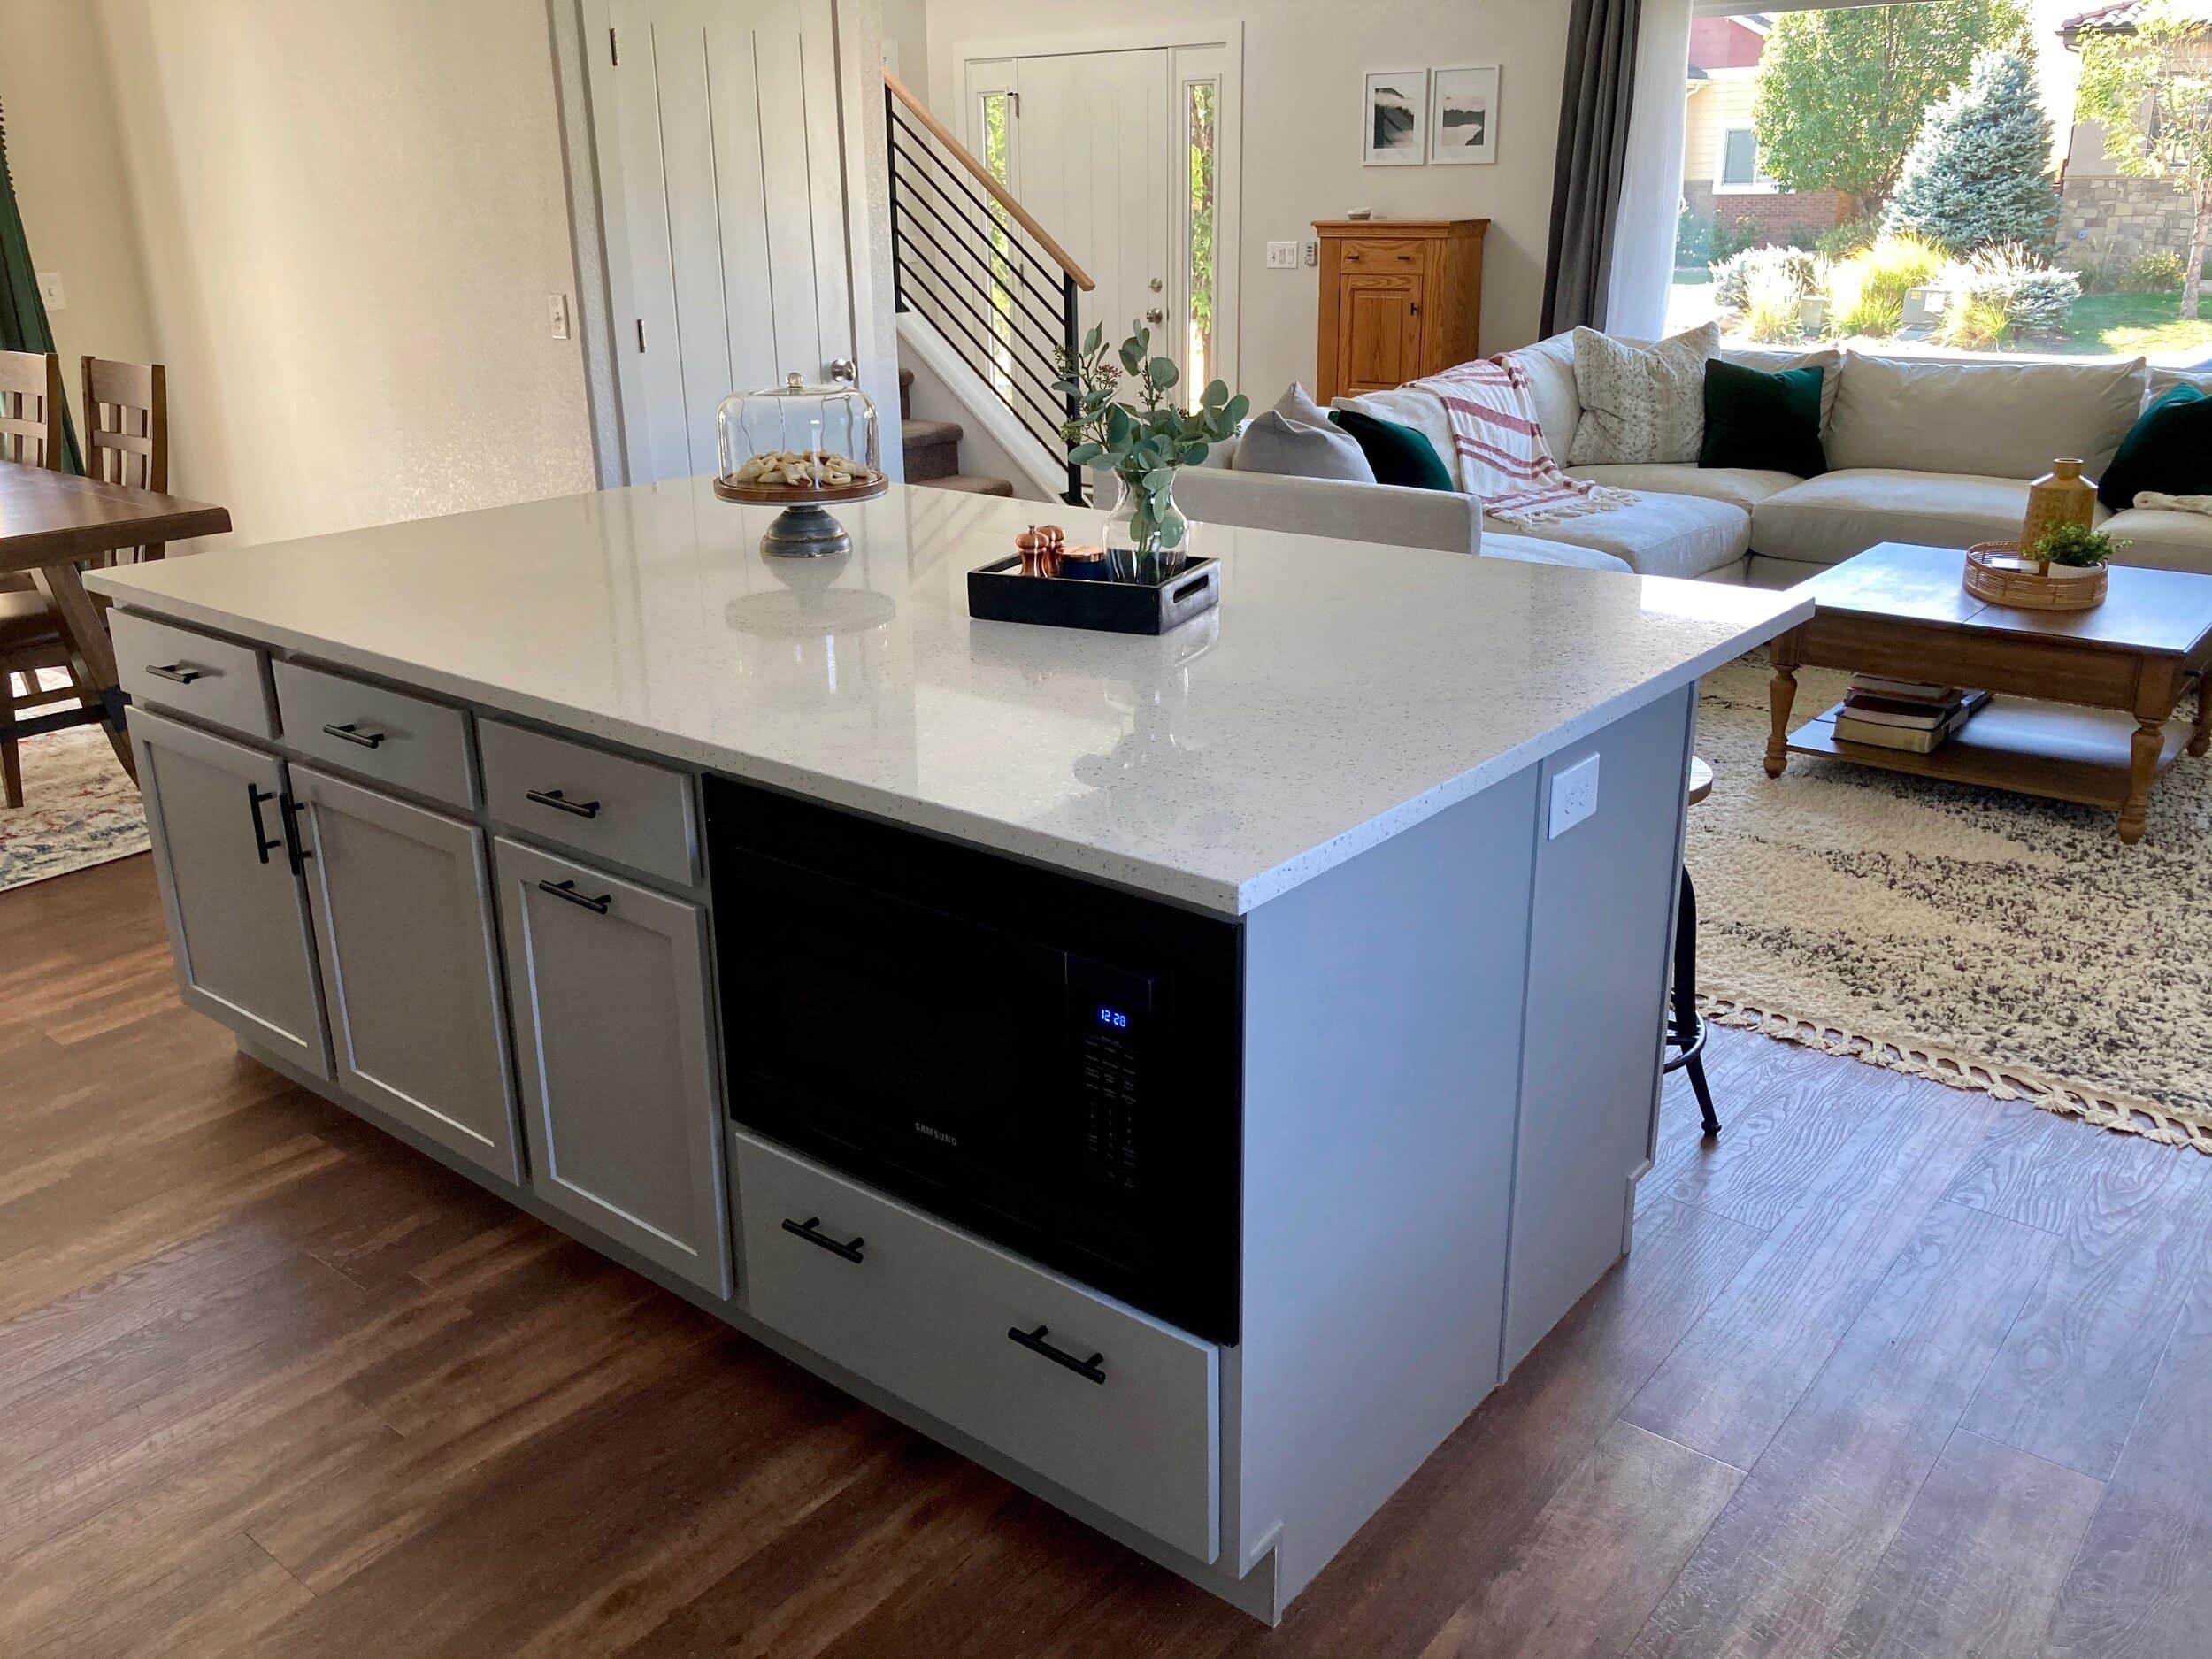 Large kitchen island with built-in microwave